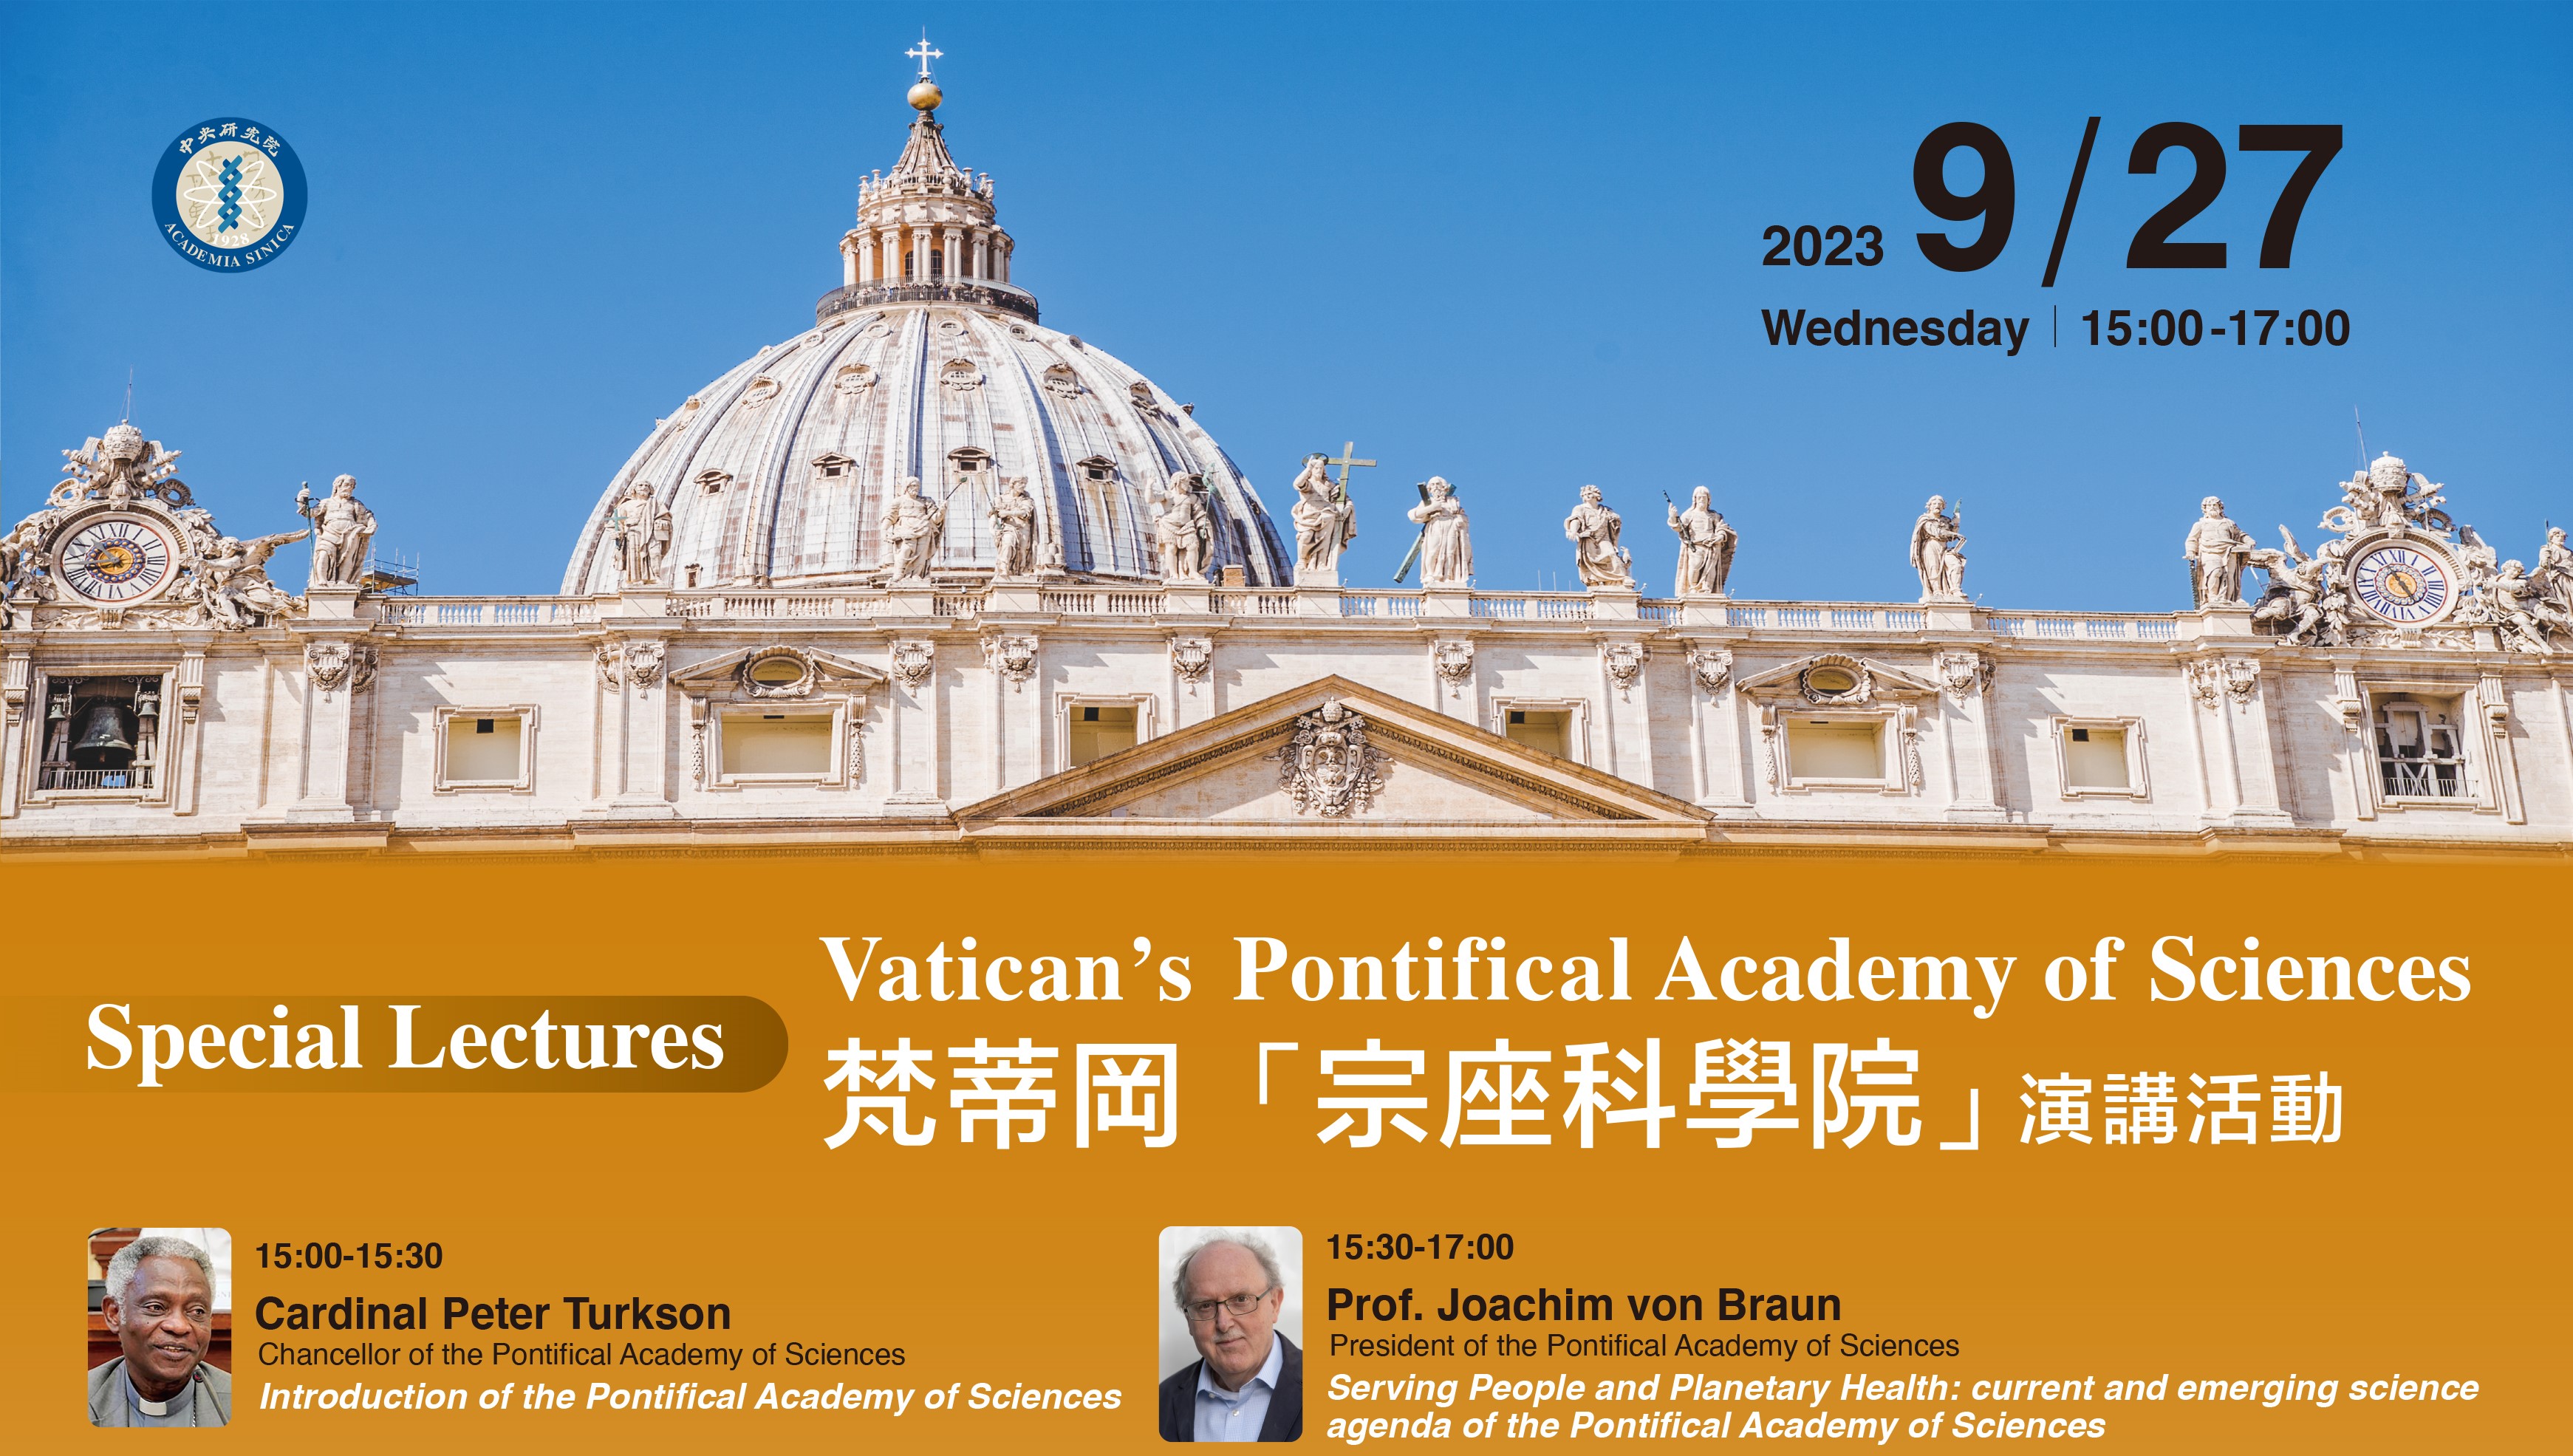 Special Lectures-Serving People and Planetary Health: current and emerging science agenda of the Pontifical Academy of Sciences